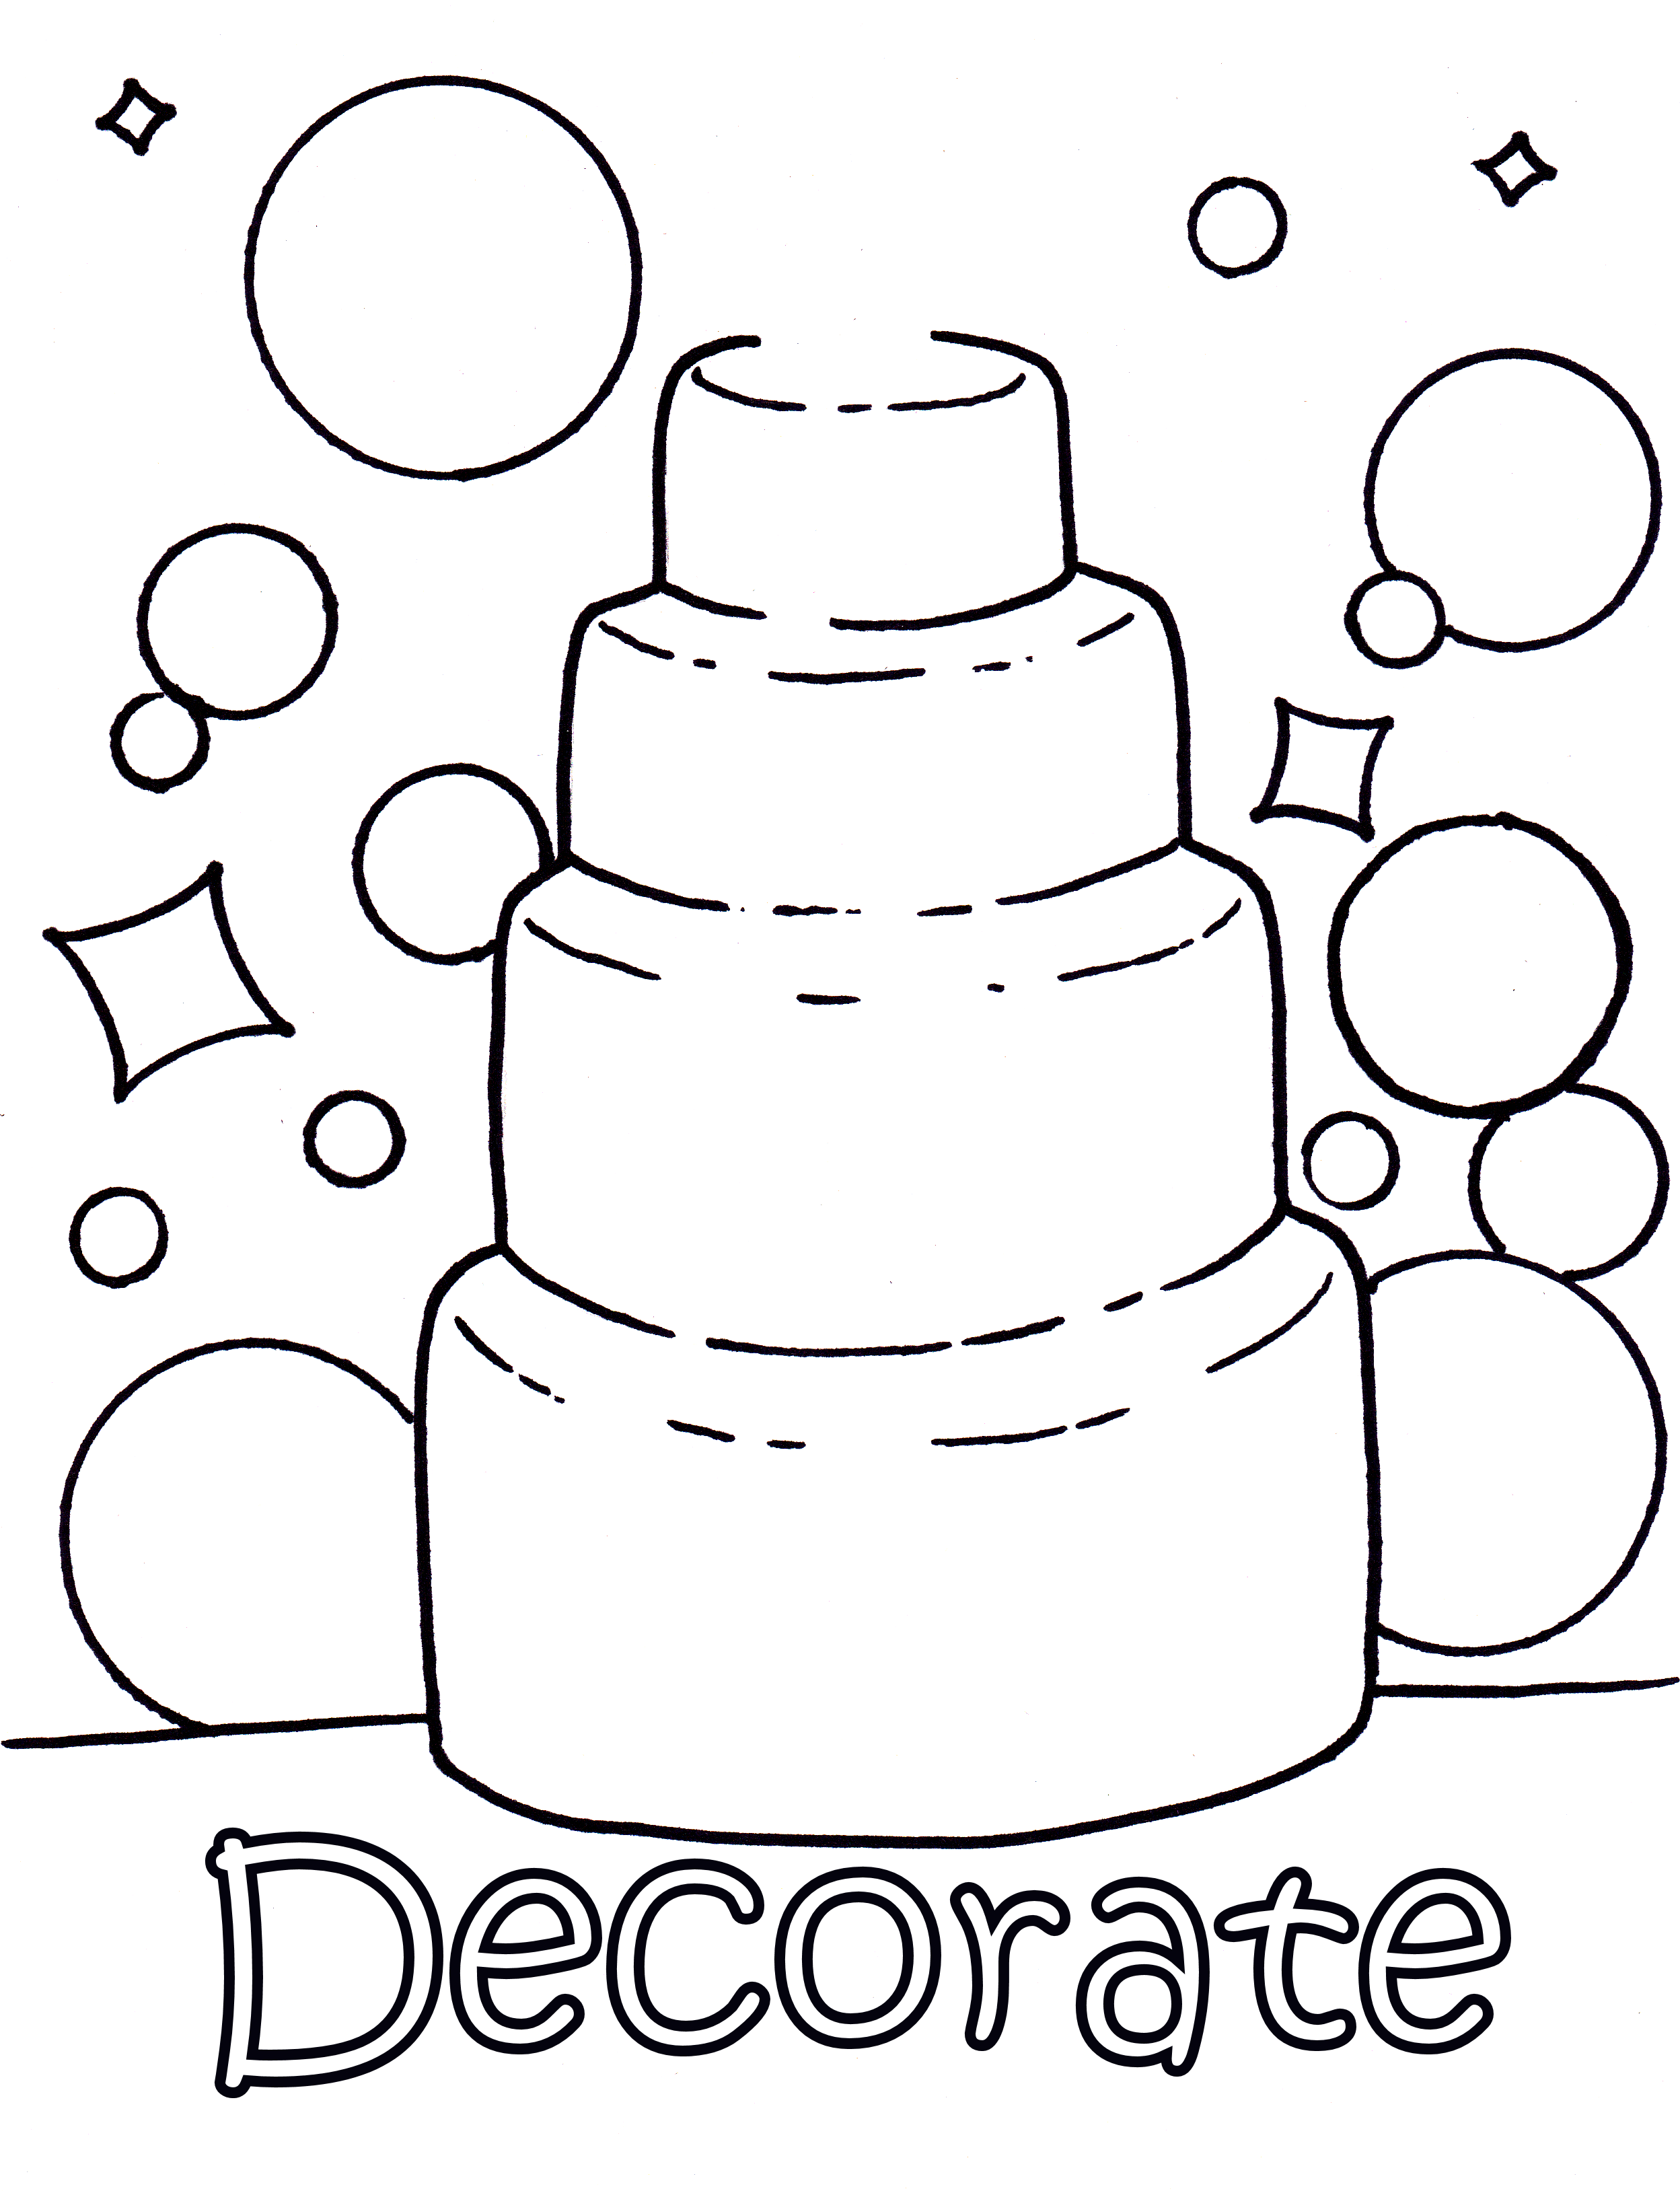 Wedding Coloring Pages   Only Coloring Pages   Coloring Home